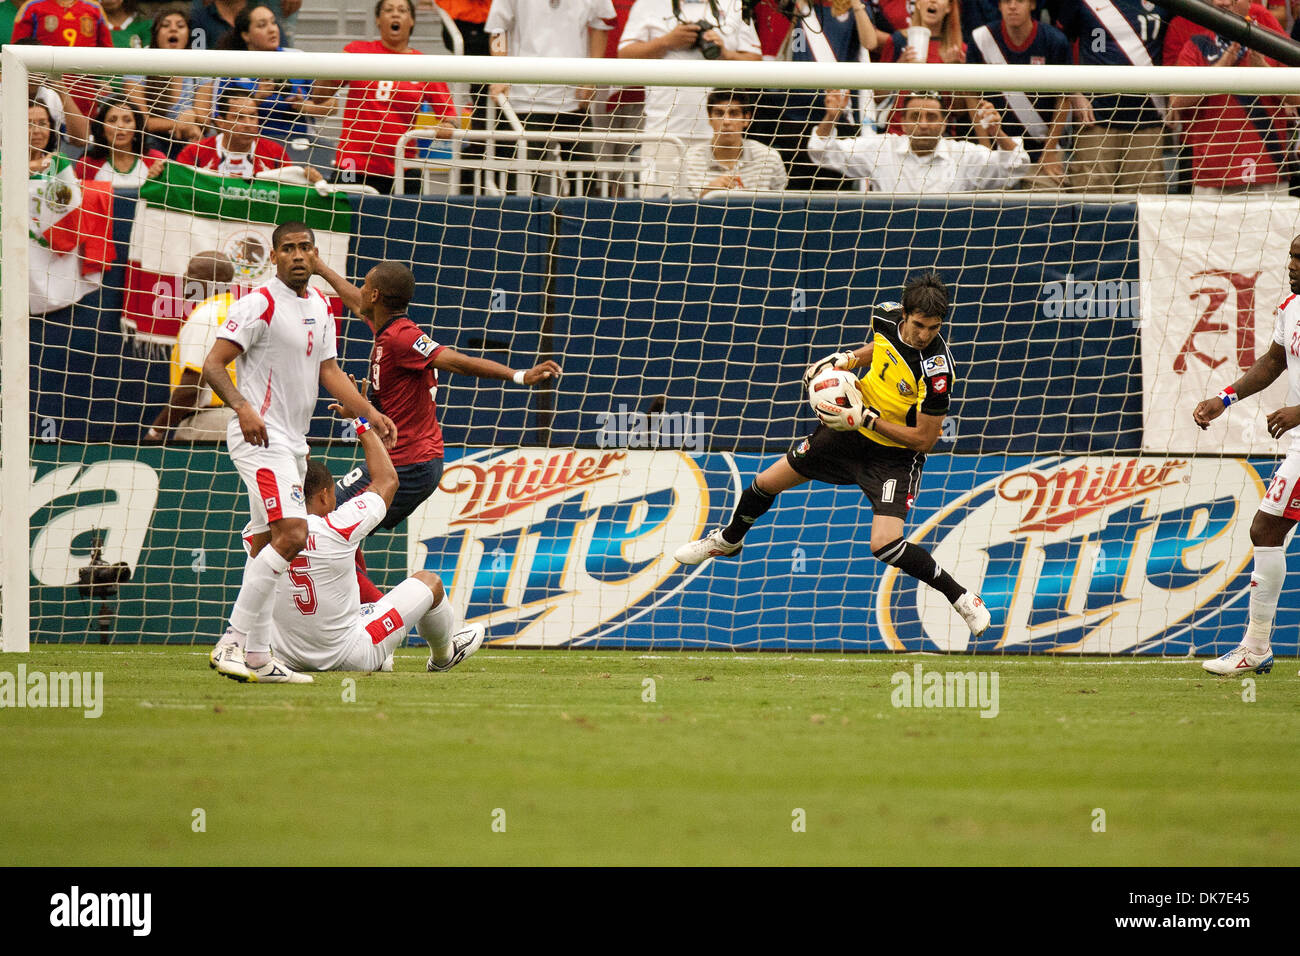 June 22, 2011 - Houston, Texas, U.S - Panama Soccer Team Goalkeeper Jaime Penedo (1) jumps in the air to secure the ball and stop the USA from scoring. USA defeated Panama 1-0. (Credit Image: © Juan DeLeon/Southcreek Global/ZUMAPRESS.com) Stock Photo